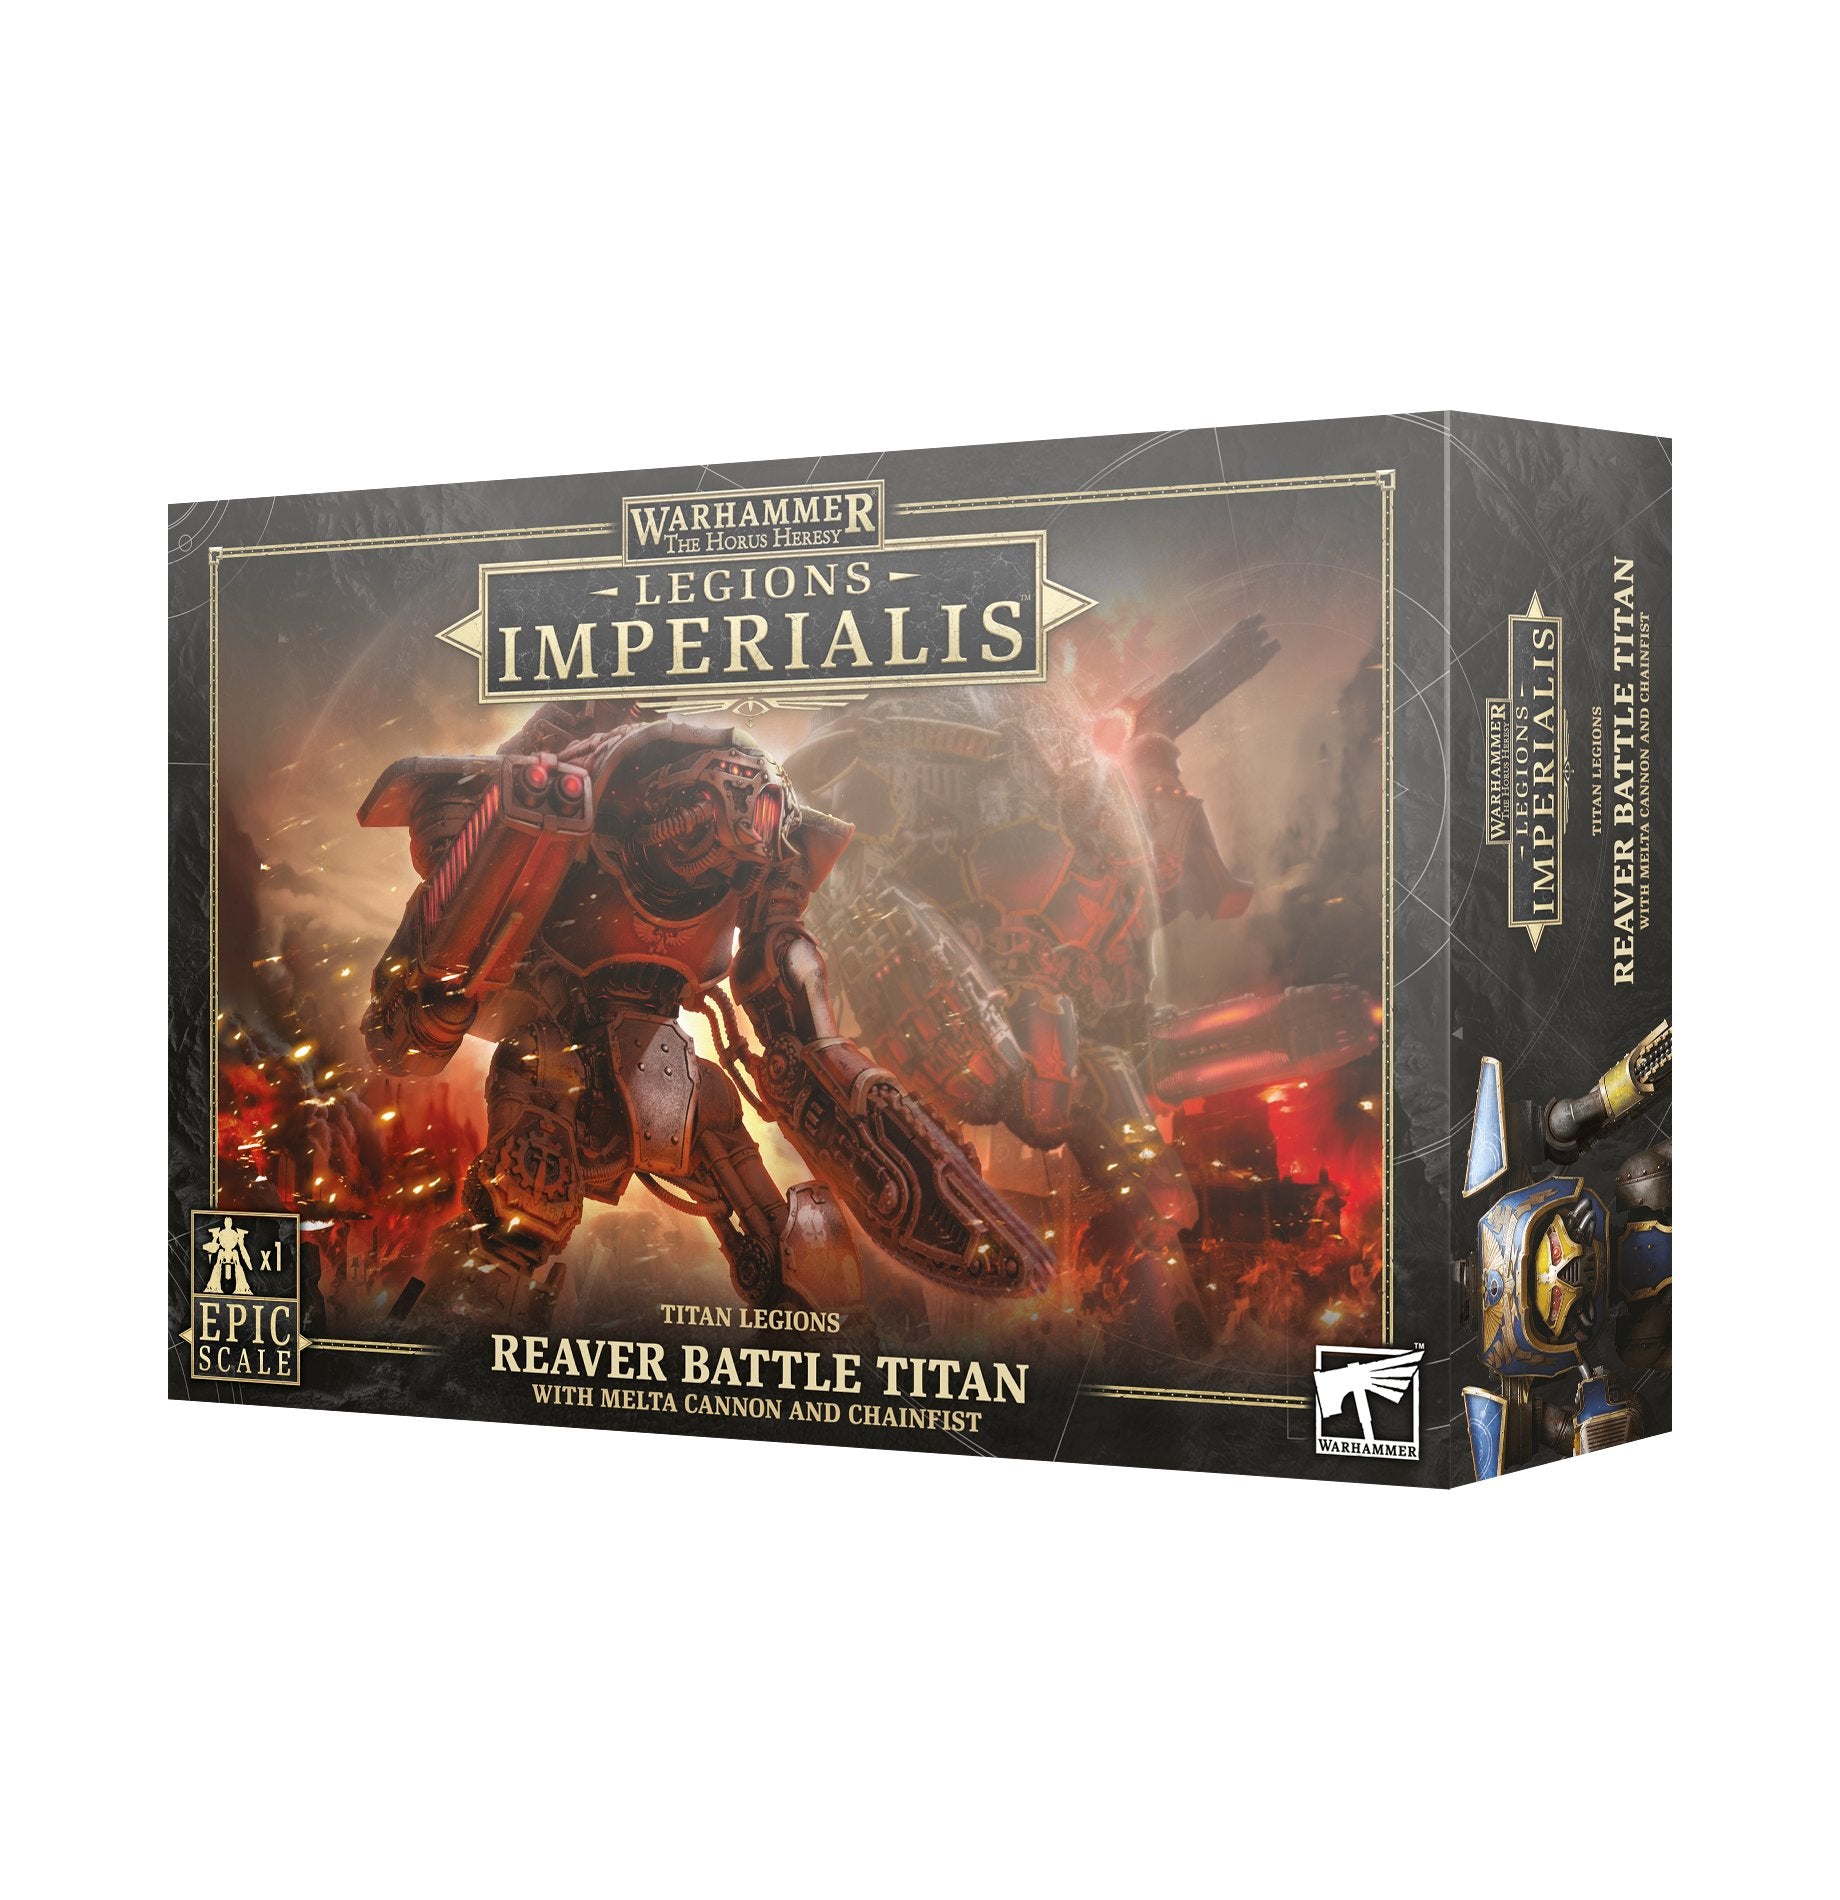 LEGIONS IMPERIALIS: REAVER TITAN WITH MELTA CANNON & CHAINFIST | BD Cosmos